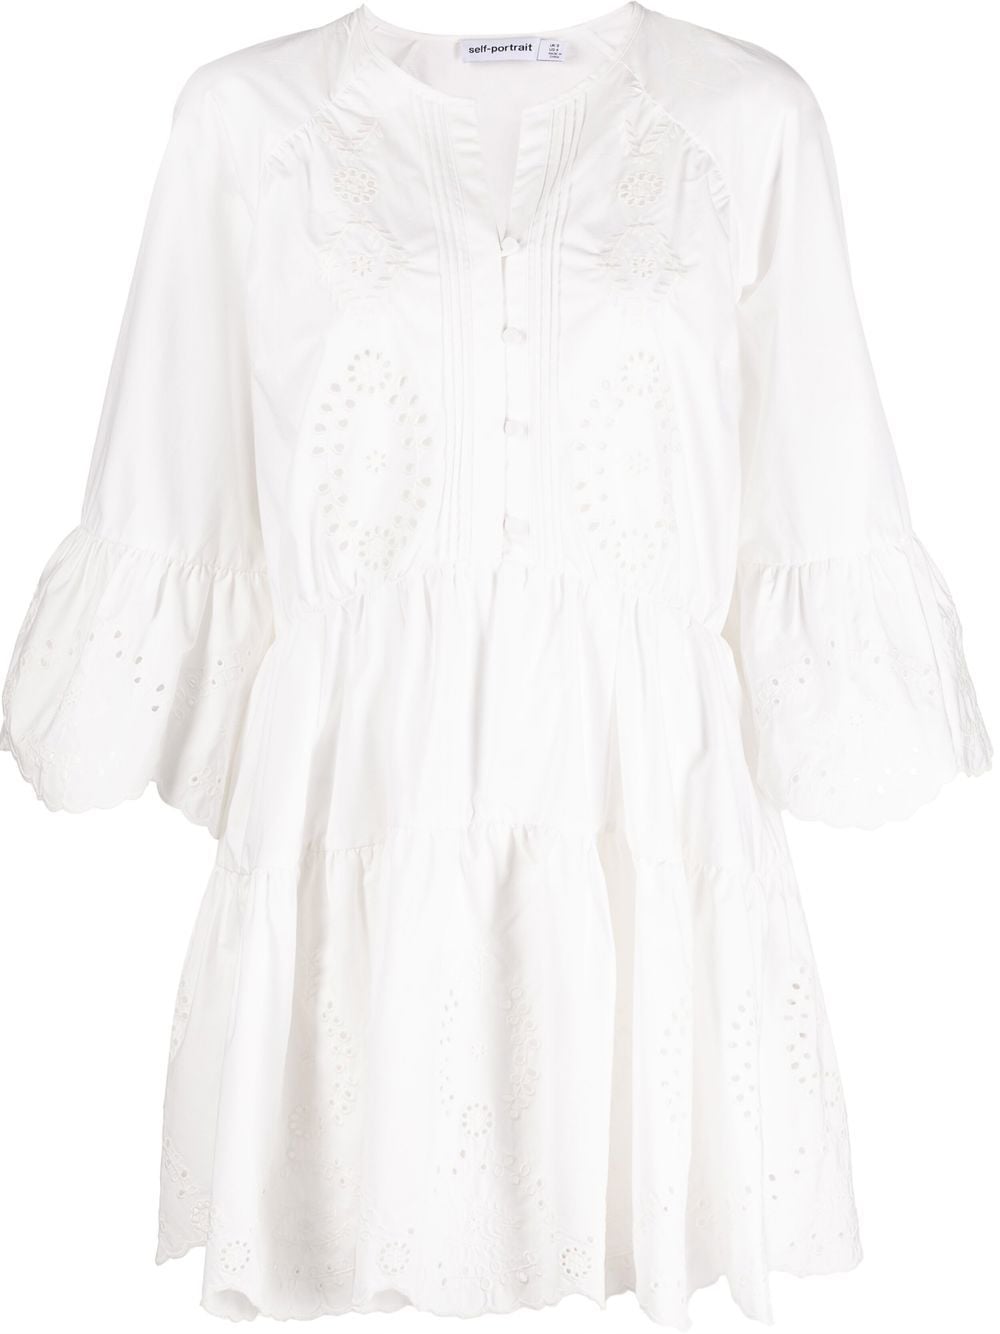 Self-Portrait broderie anglaise tiered mini dress - White